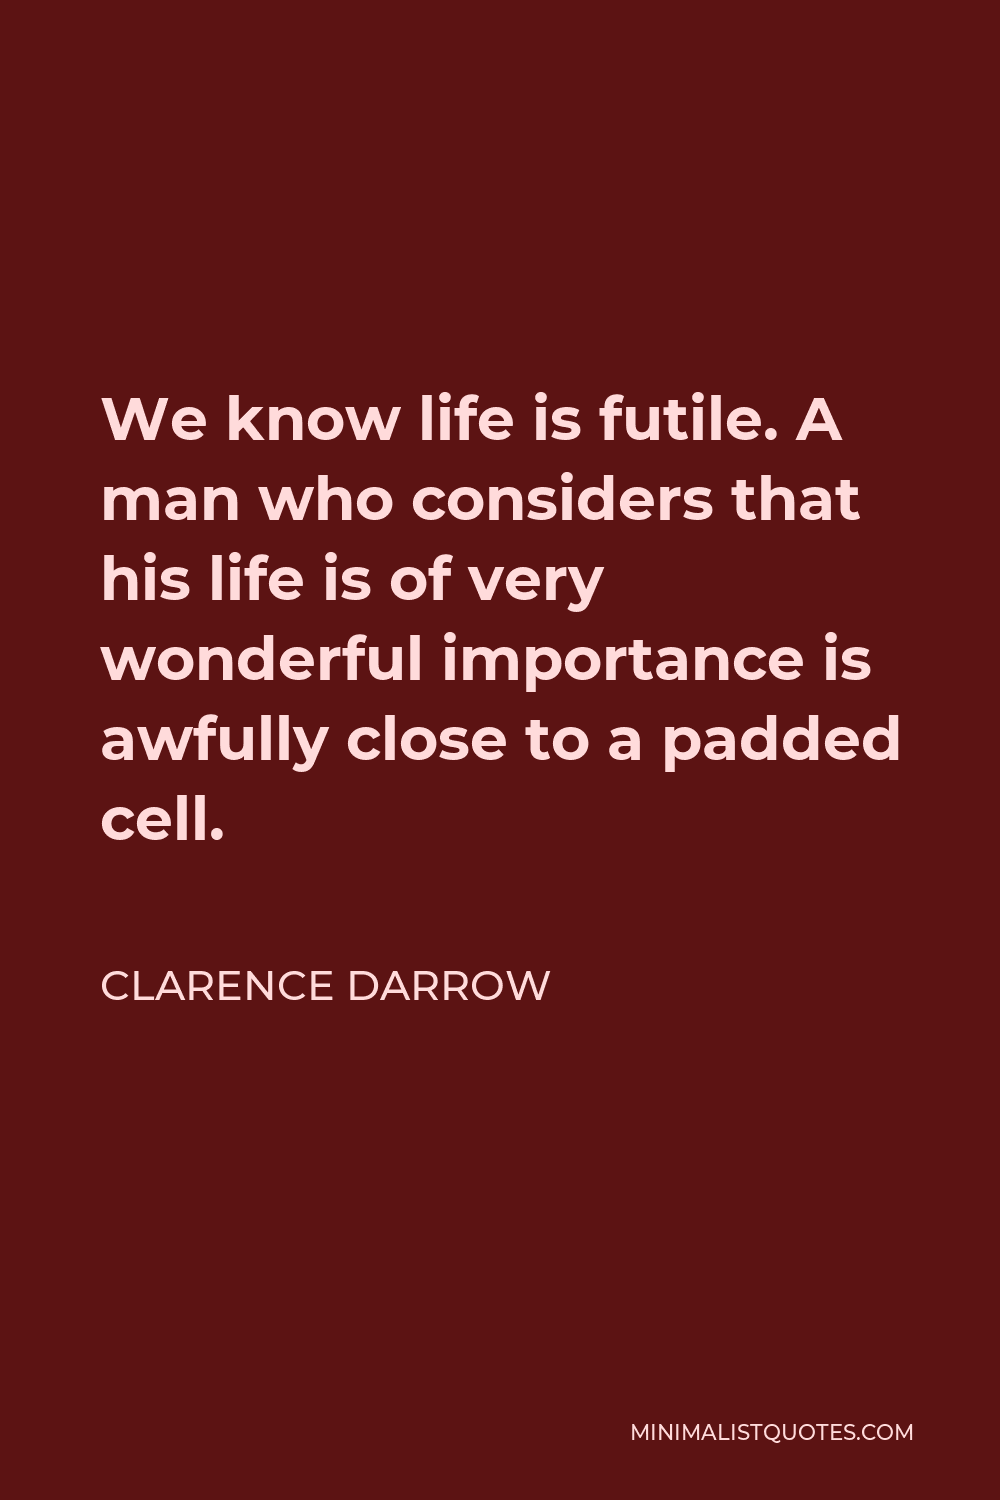 Clarence Darrow Quote - We know life is futile. A man who considers that his life is of very wonderful importance is awfully close to a padded cell.